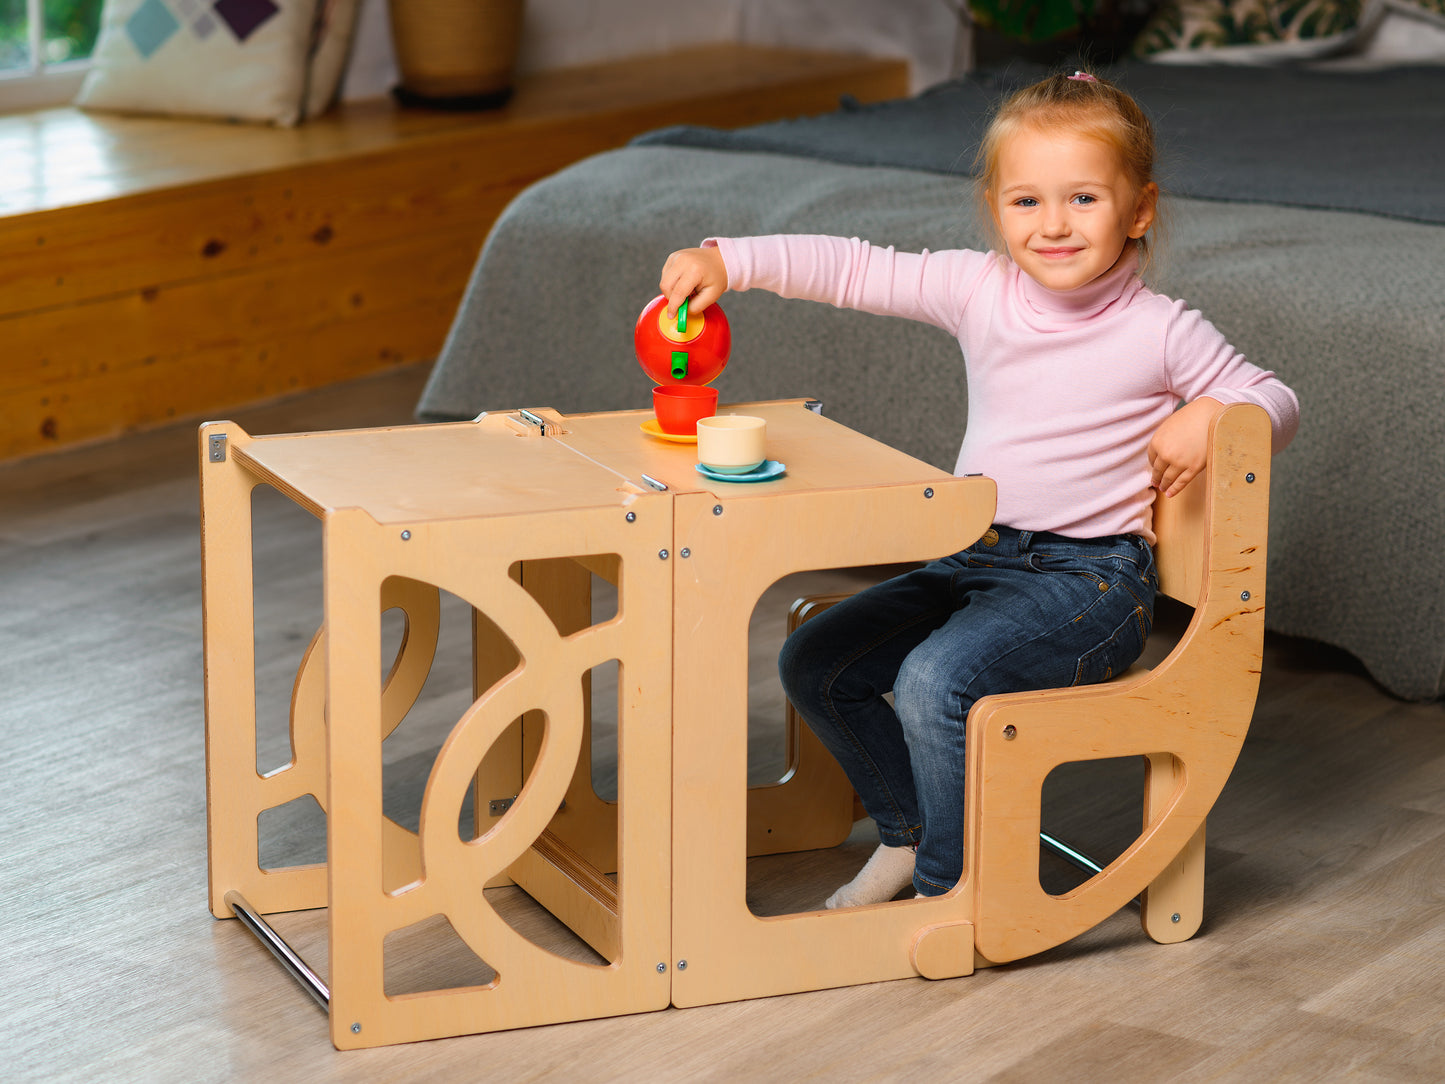 Natural Convertible learning toddler tower & table WITH BACK, montessori learning tower - Climbambino